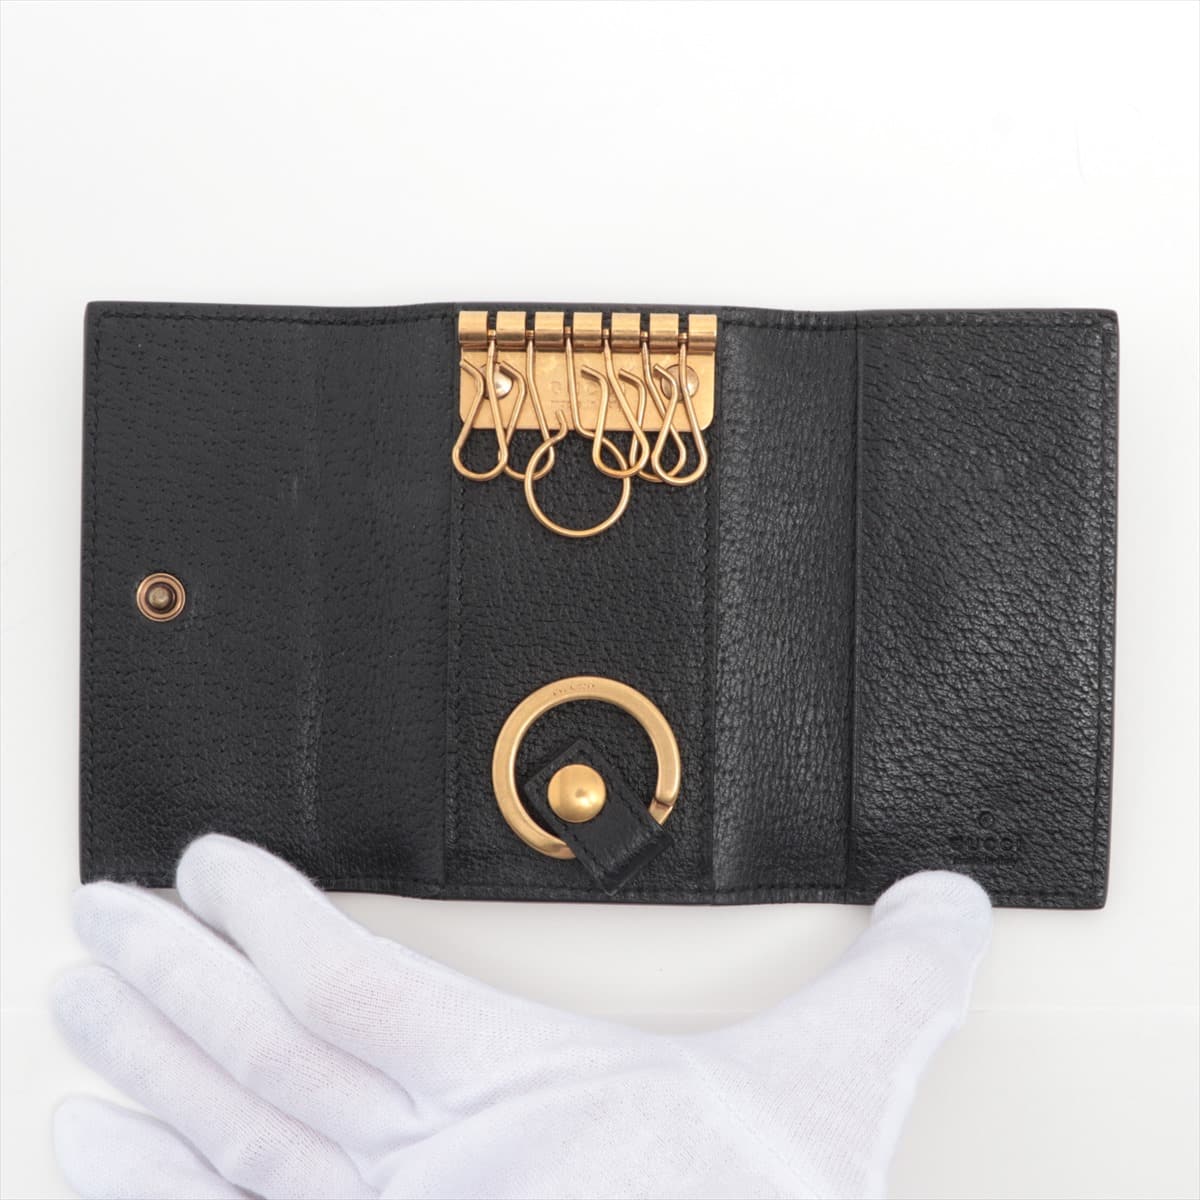 Gucci GG Marmont 435305 Leather Key case Black